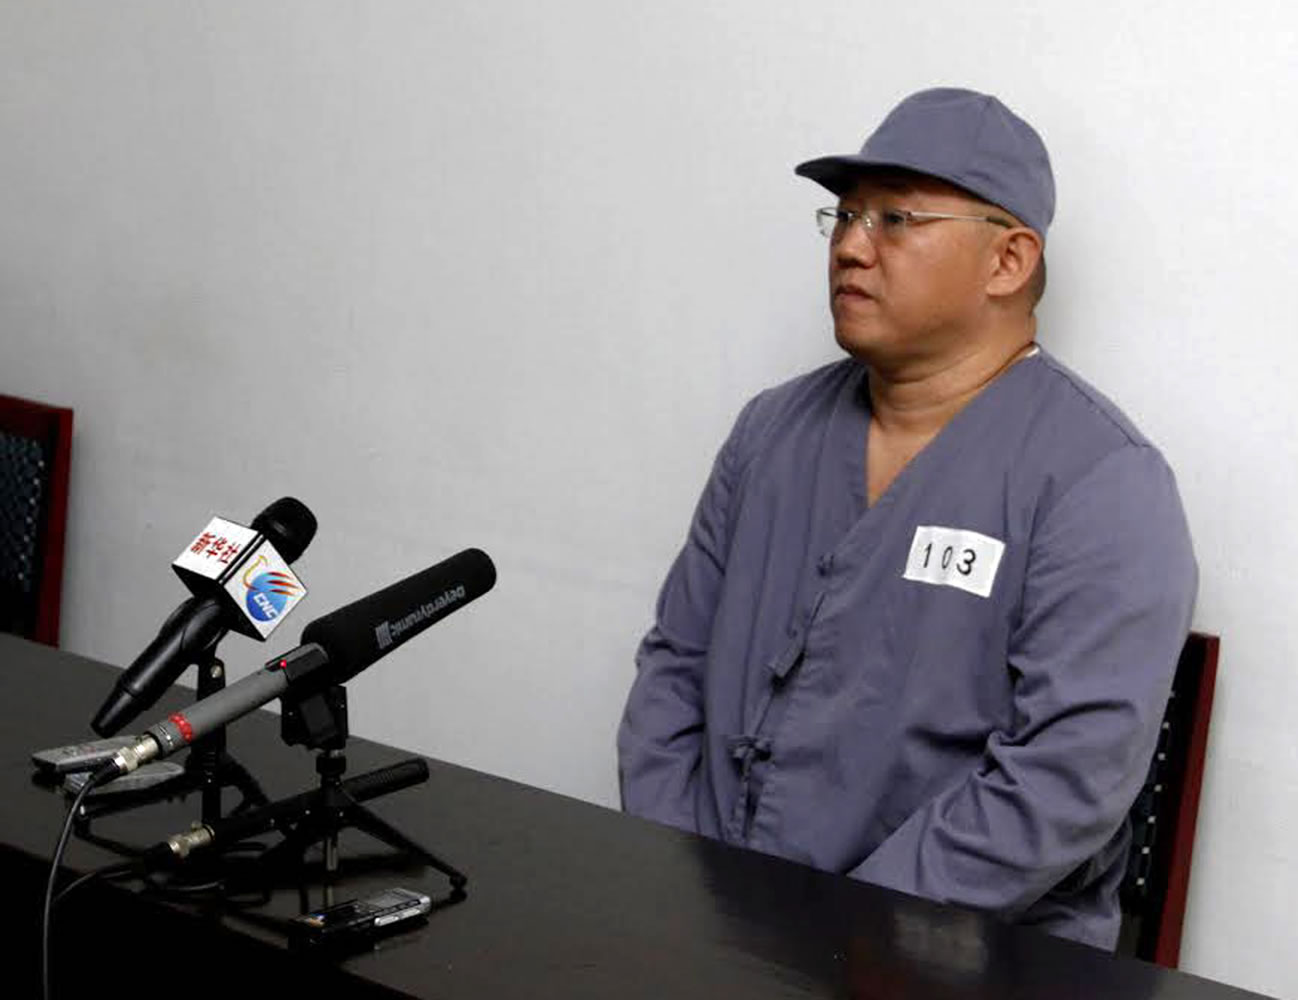 American missionary Kenneth Bae speaks to reporters at Pyongyang Friendship Hospital in Pyongyang on Monday. Bae, 45, who has been jailed in North Korea for more than a year, appealed for the U.S.